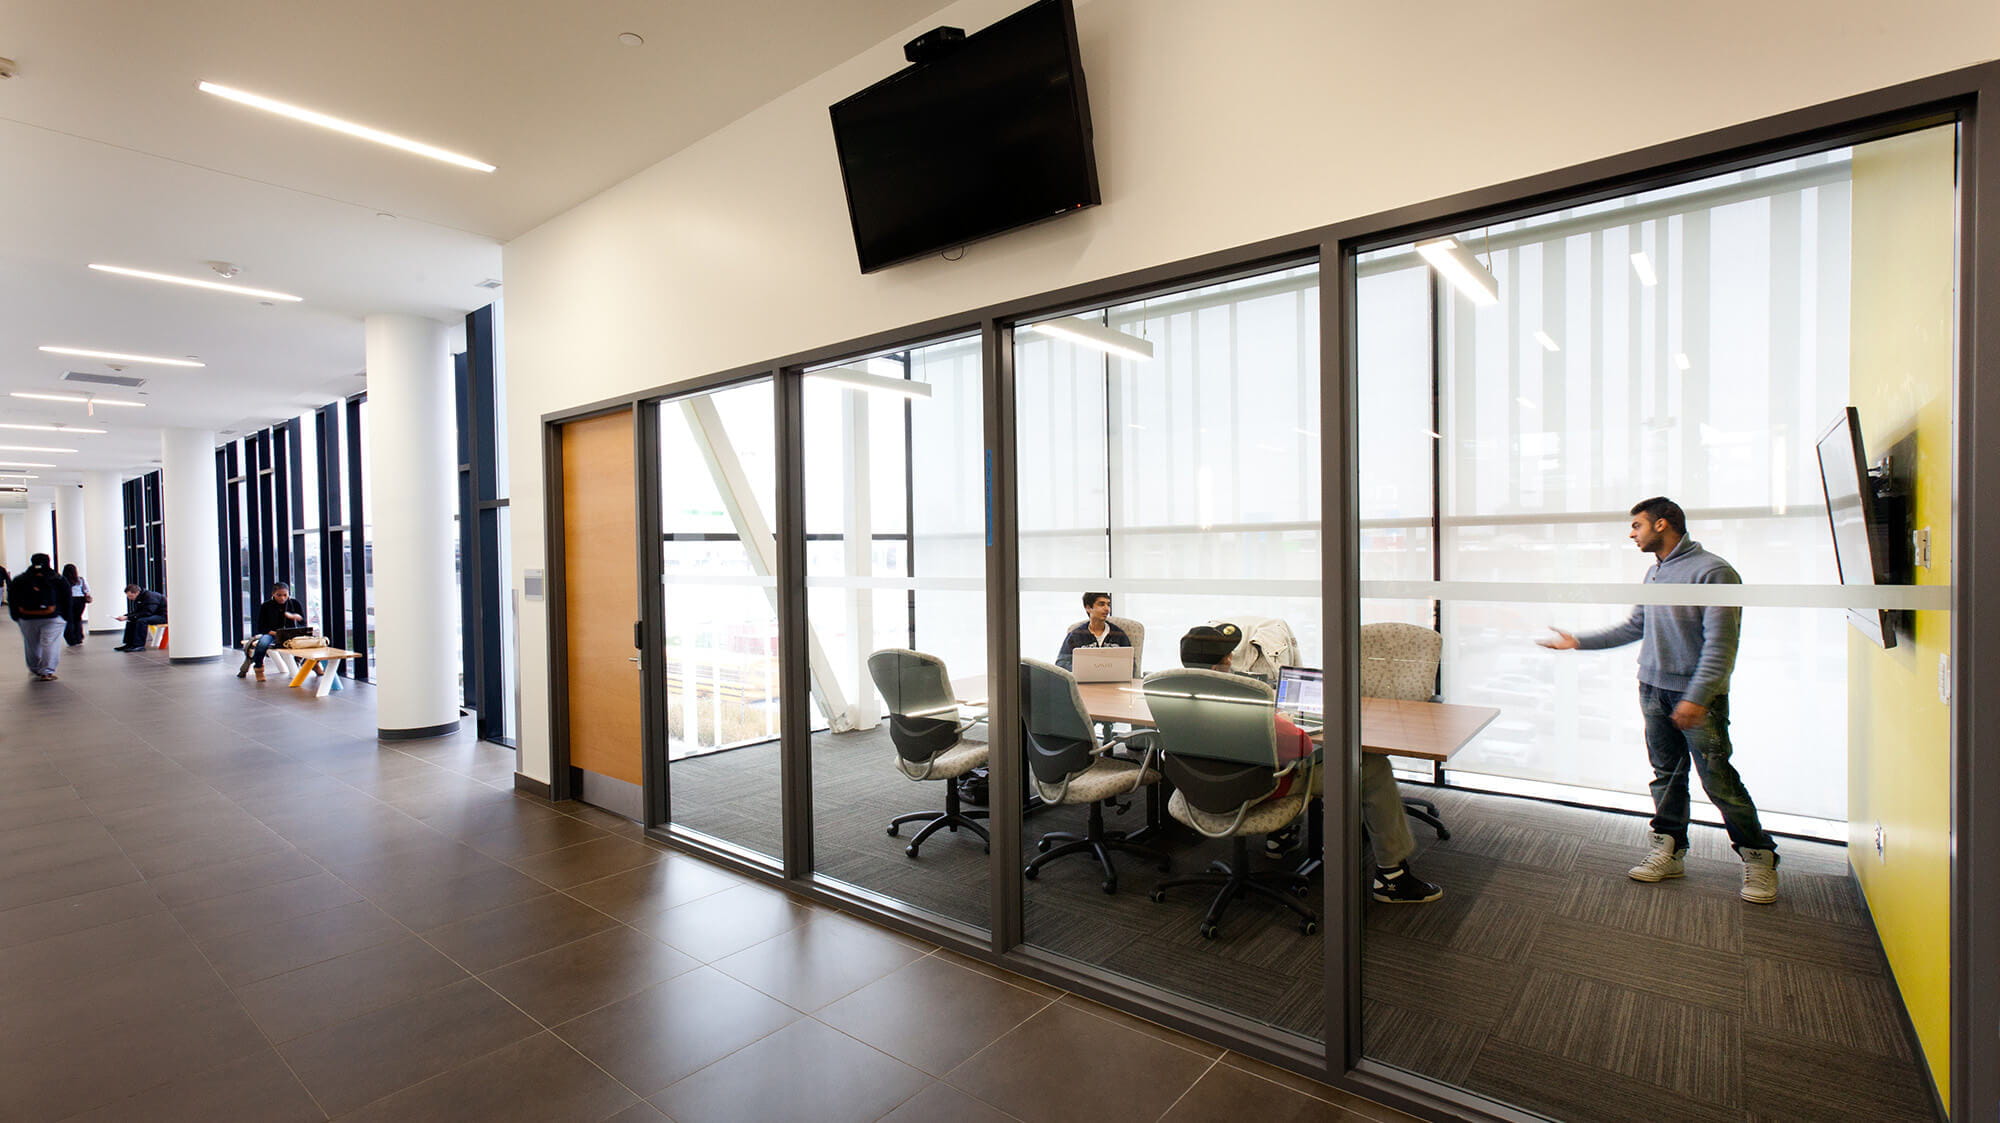 A hallway looking into a glass-walled group study room with a table and students inside.